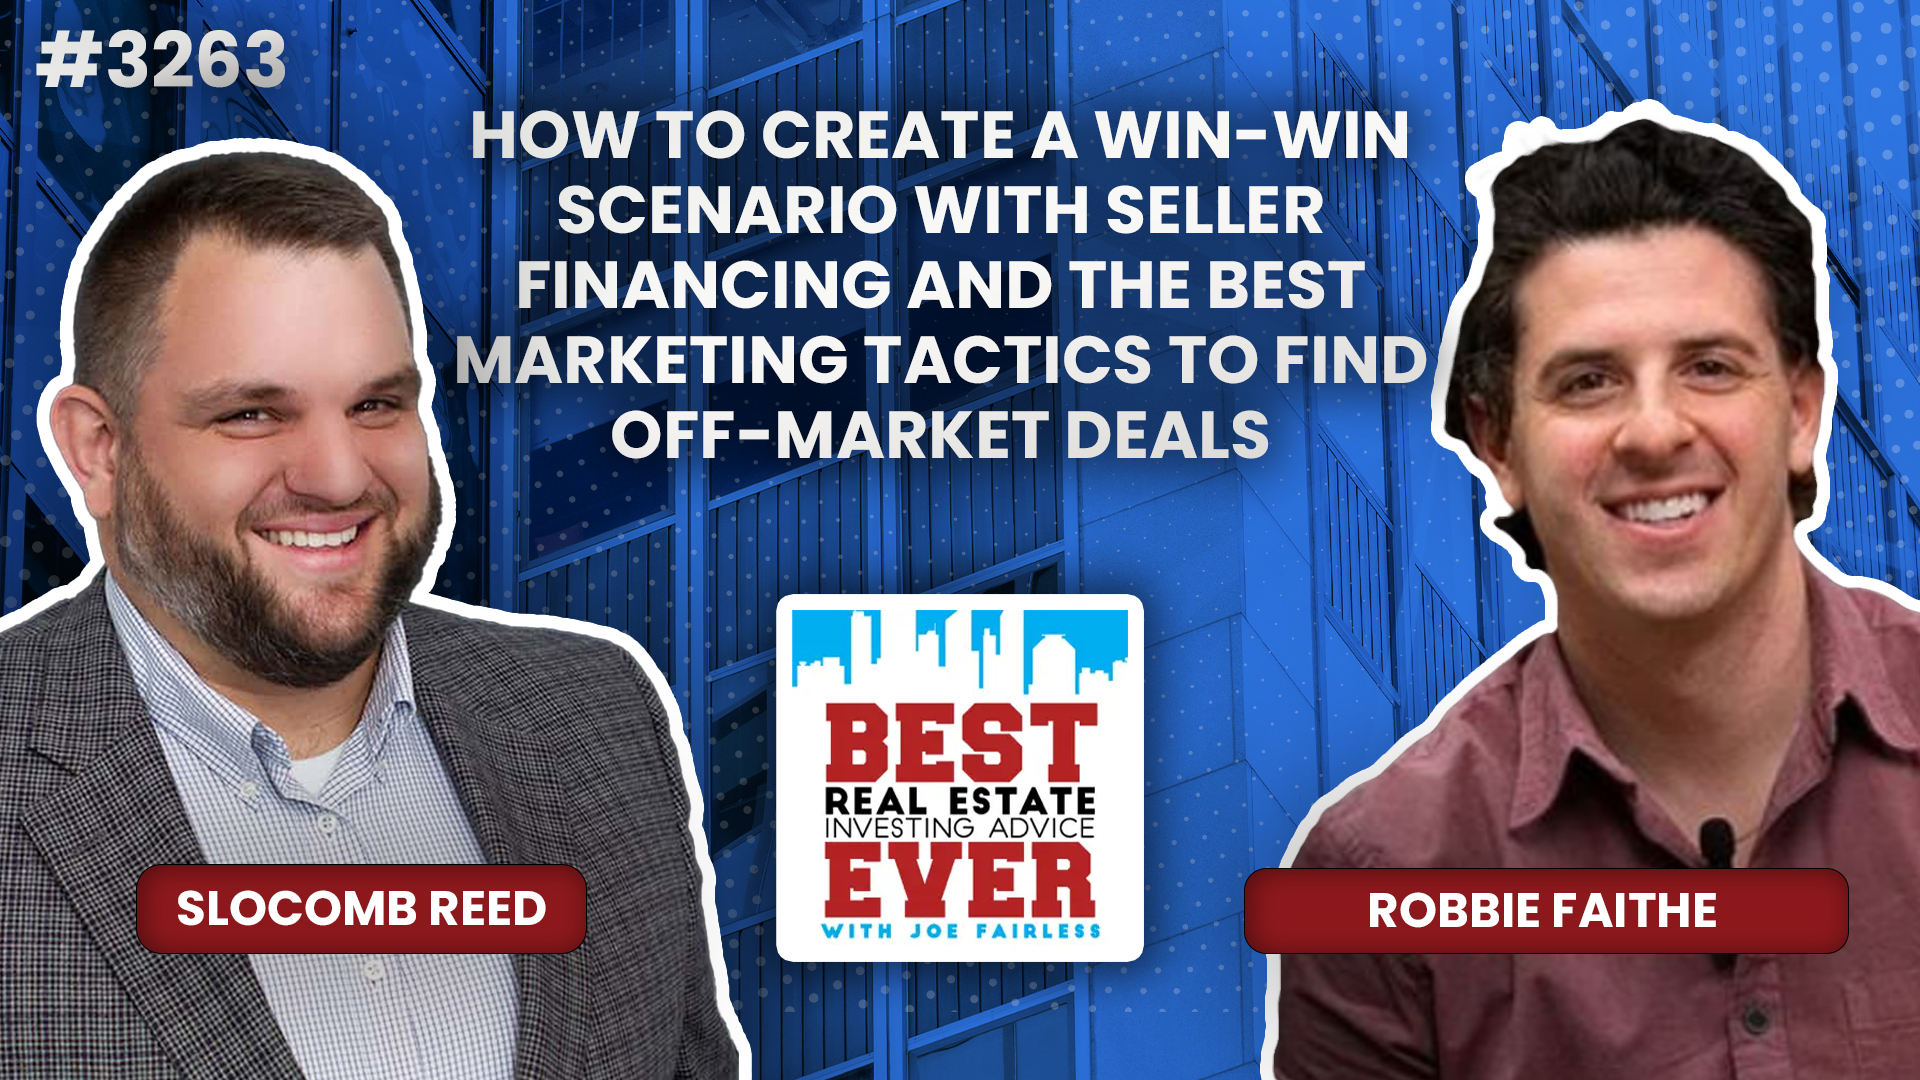 JF3263: Robbie Faithe — How to Create a Win-Win Scenario With Seller Financing and the Best Marketing Tactics to Find Off-Market Deals